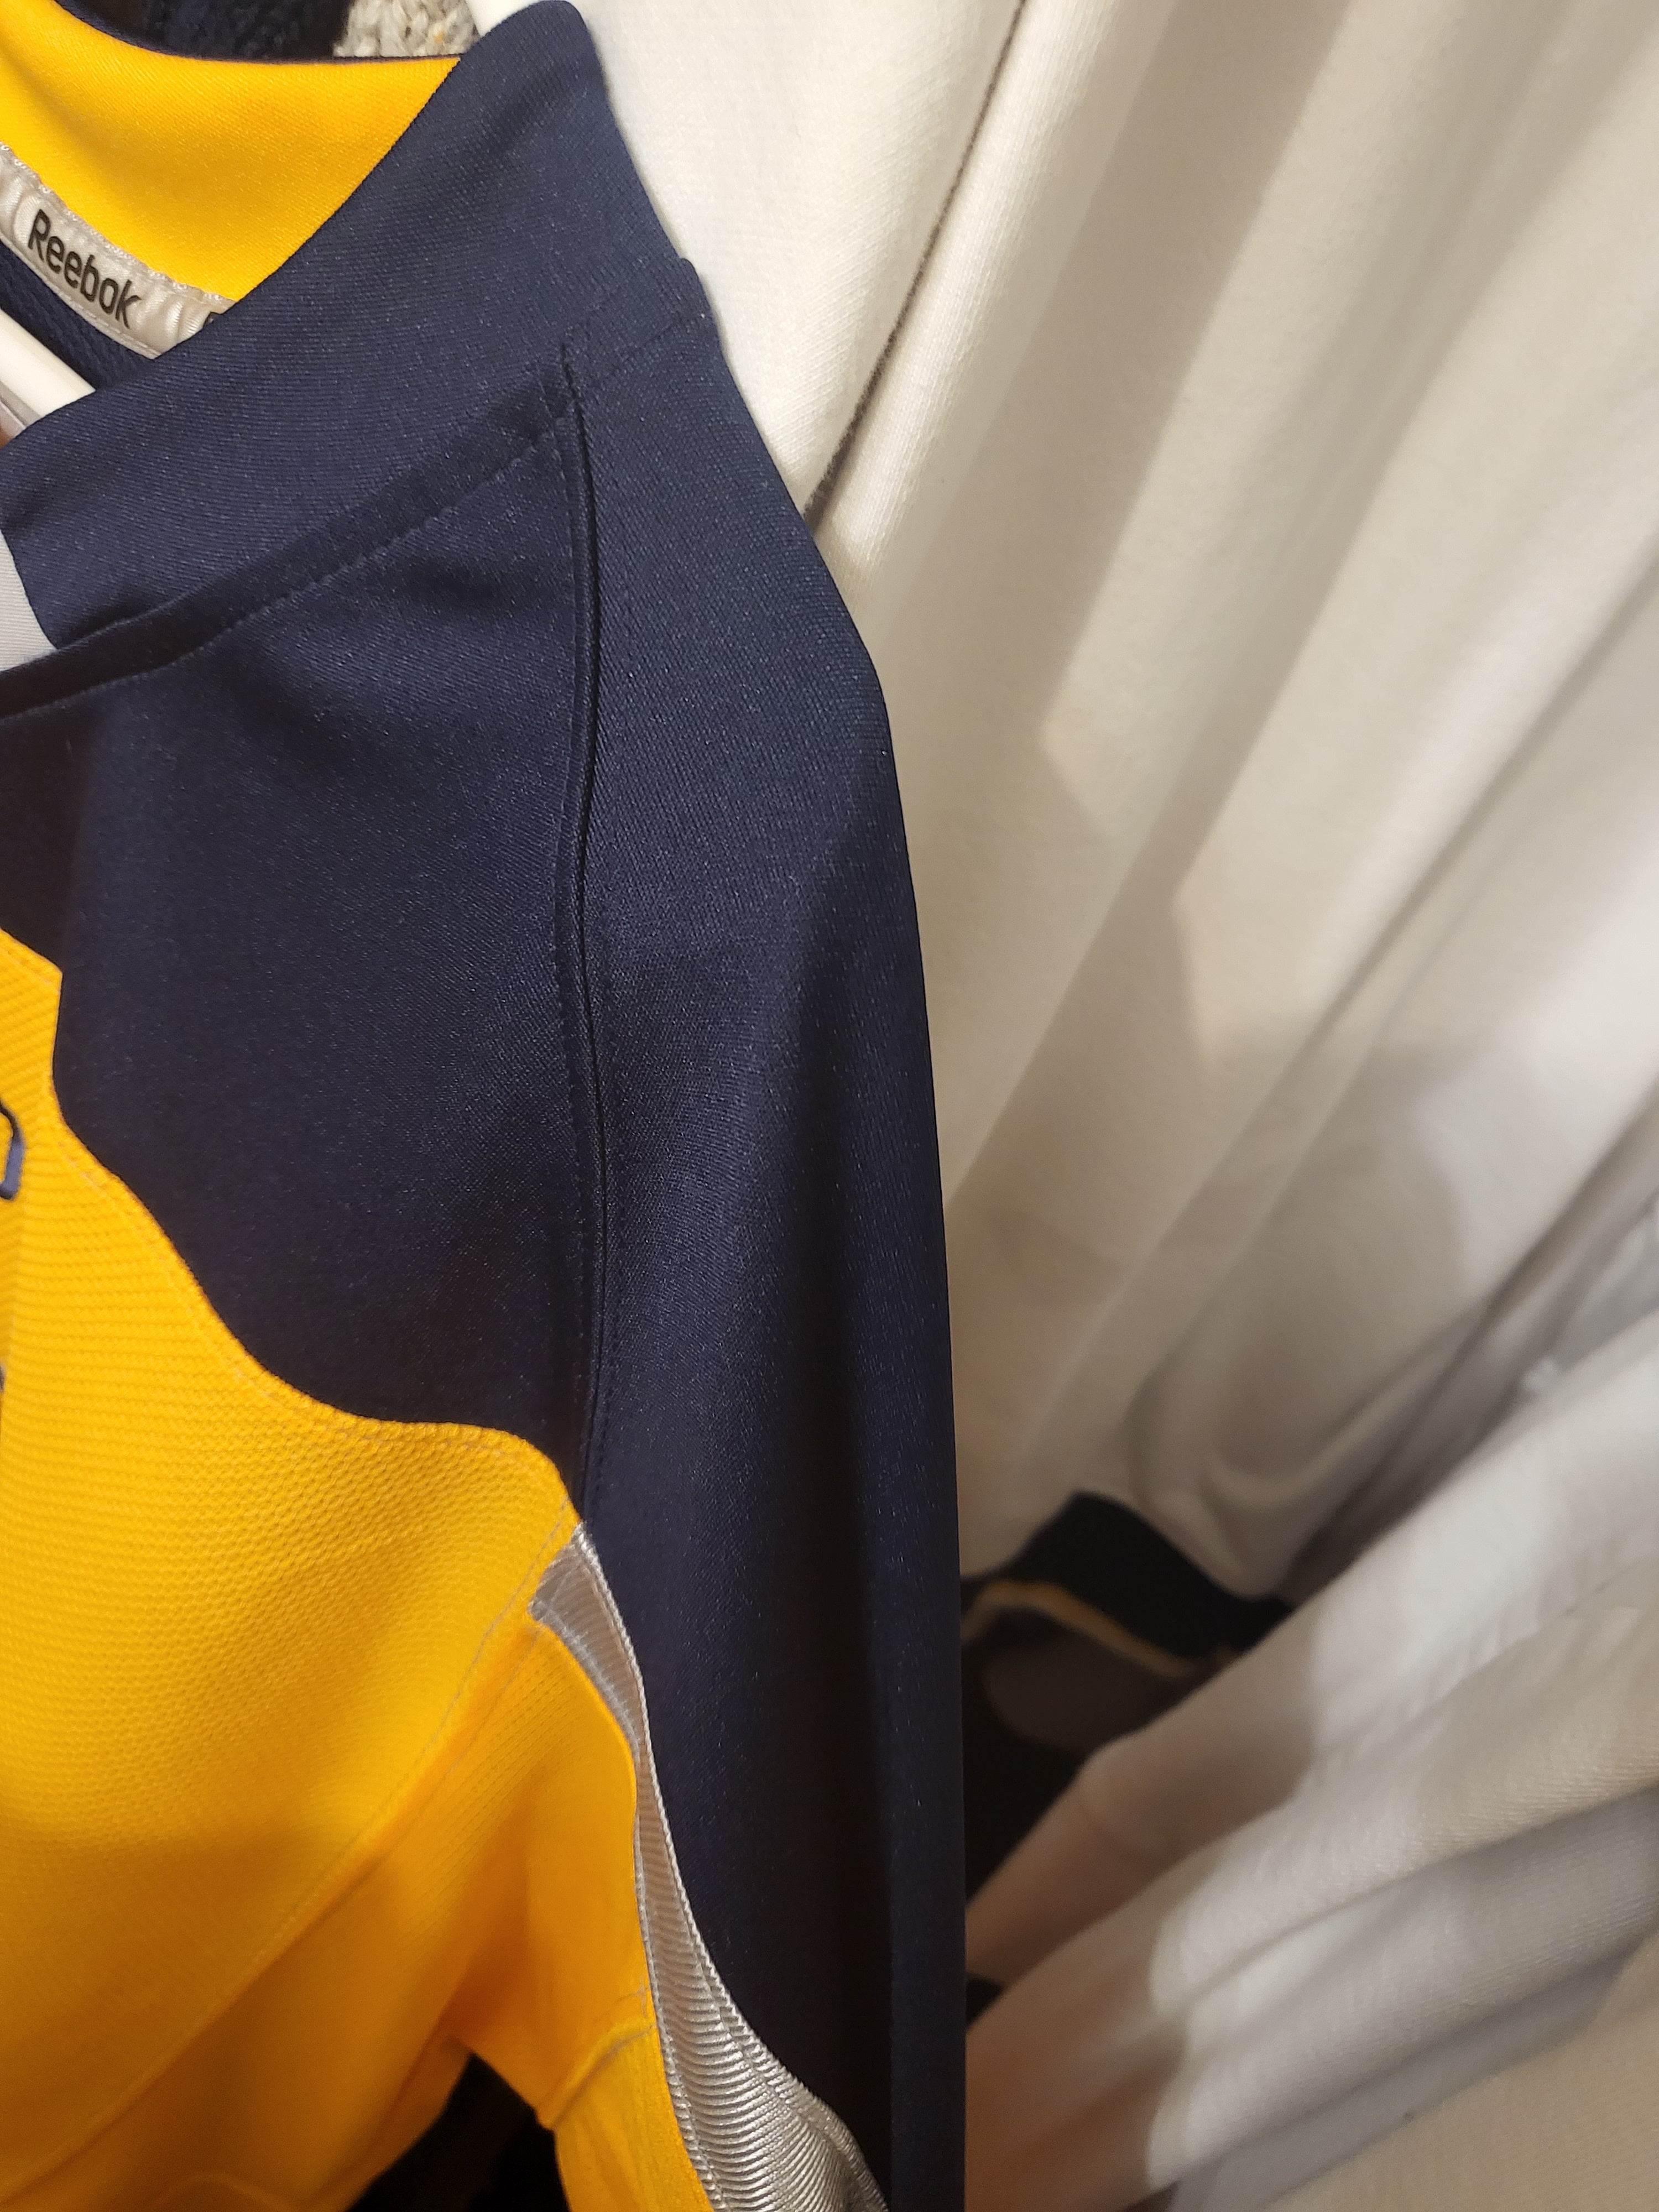 Buffalo Sabres president on 3rd jersey: 'If it's a turd burger … I'll have  to eat it